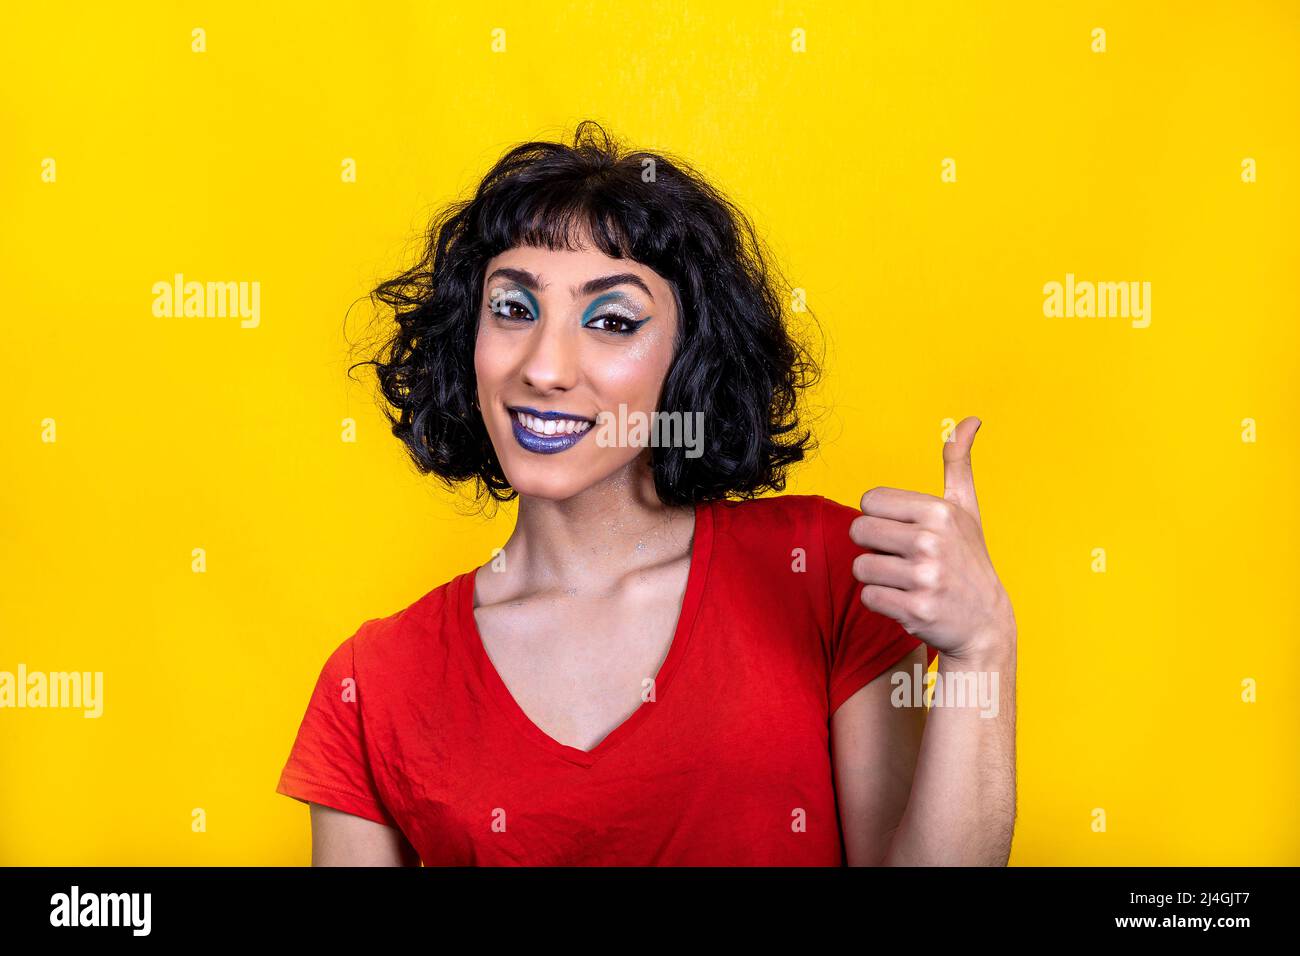 Smiling young woman in red t-shirt is showing thumb. Woman portrait with trendy look and bright colors on yellow background. Stock Photo